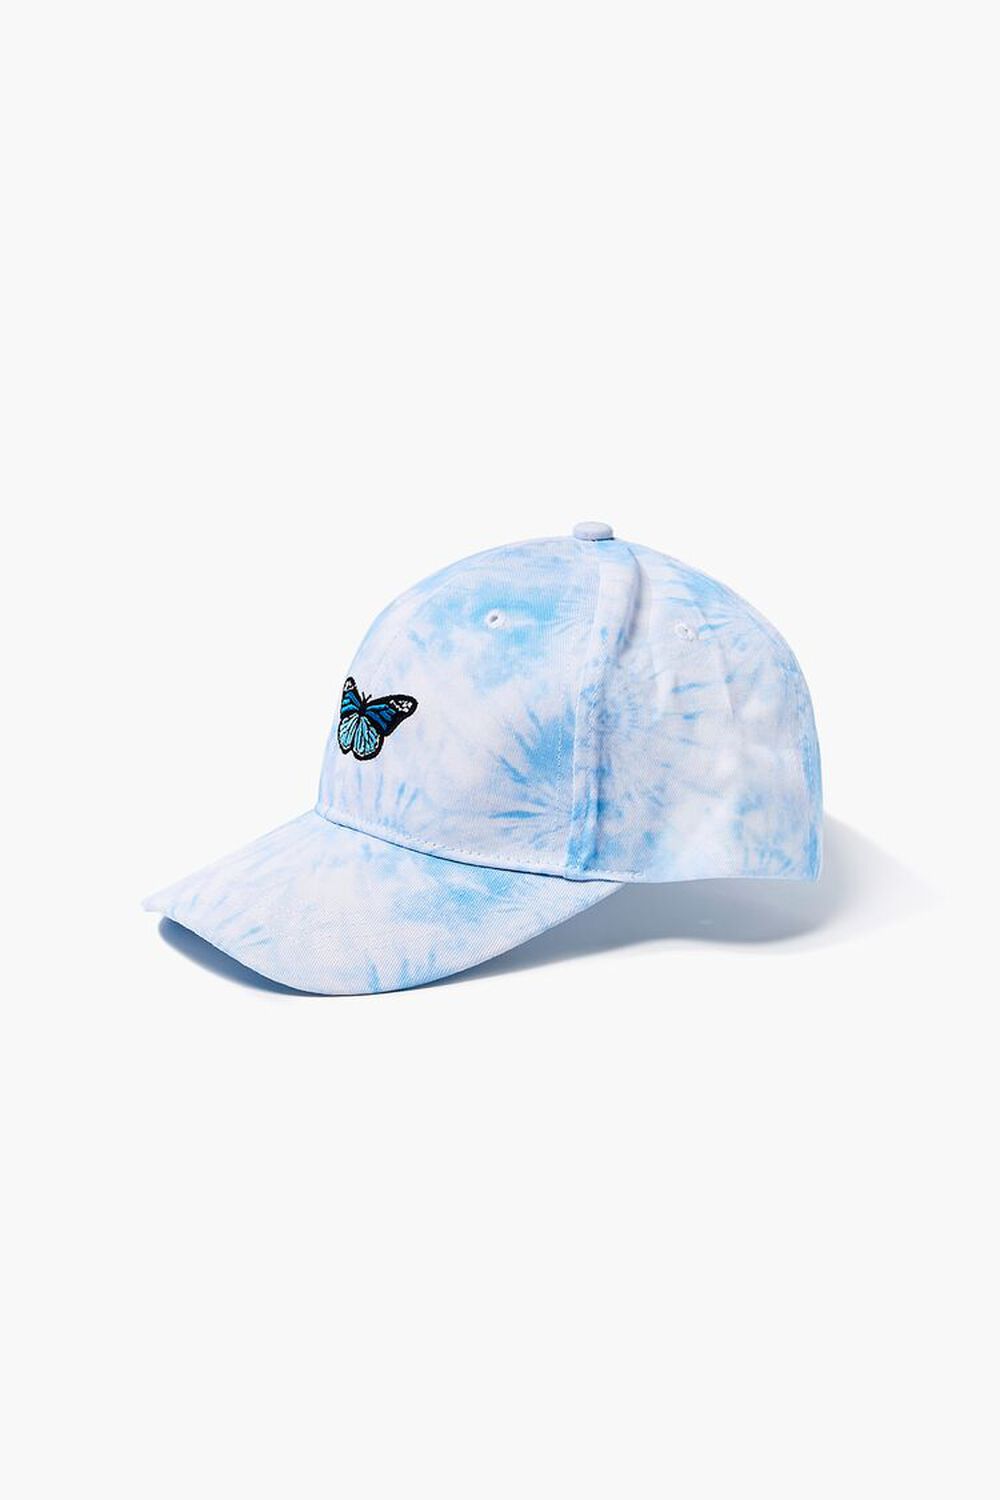 WHITE/BLUE Butterfly Embroidered Graphic Dad Cap, image 2